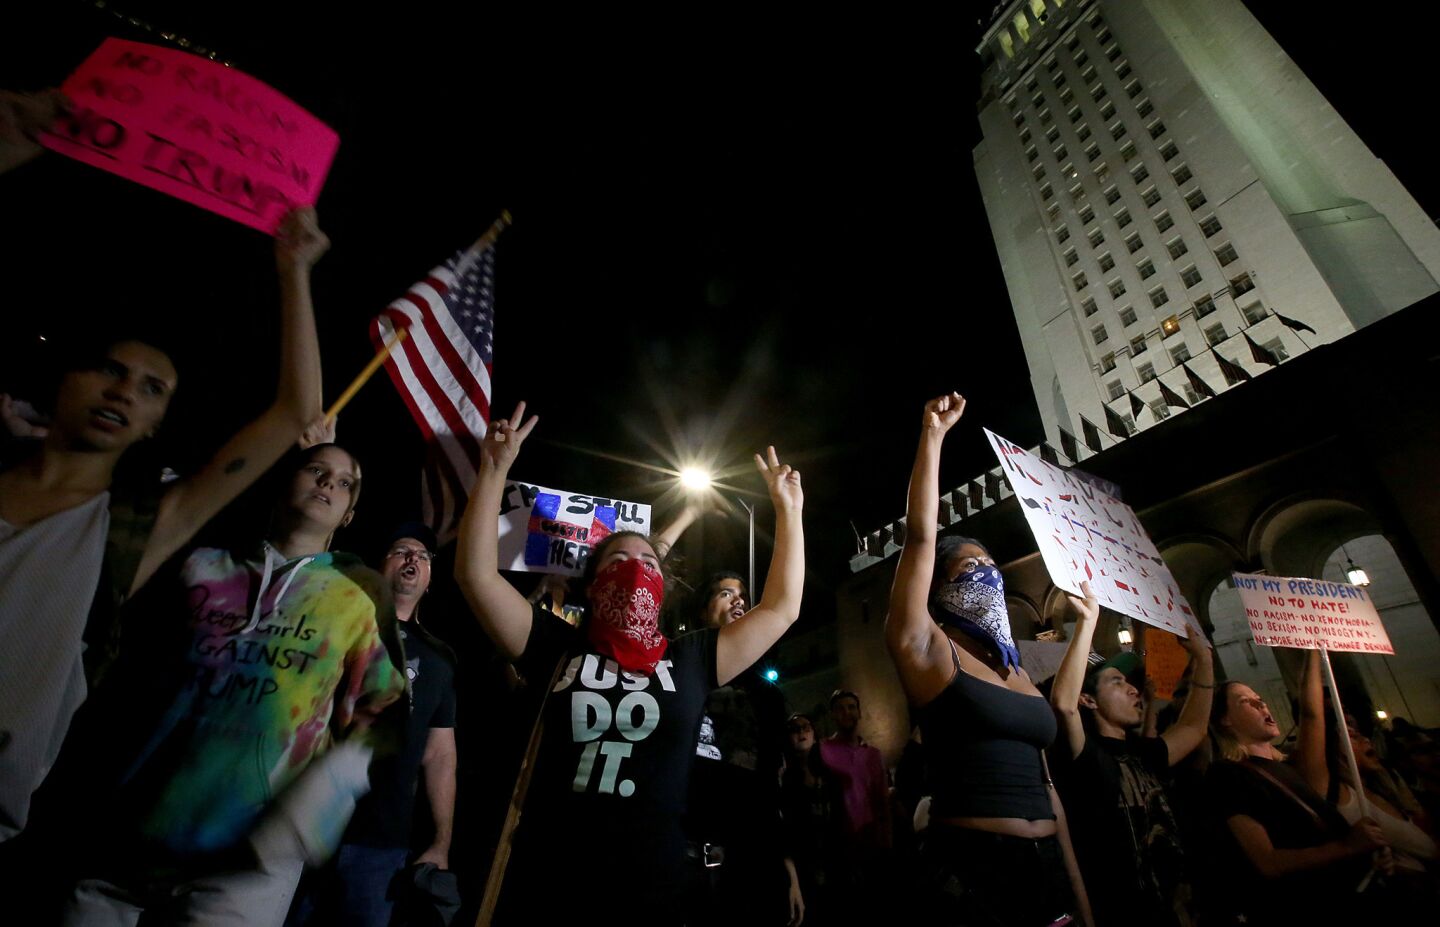 Protesters gather on the steps of L.A. City Hall before beginning their march through the streets of downtown on Friday night.